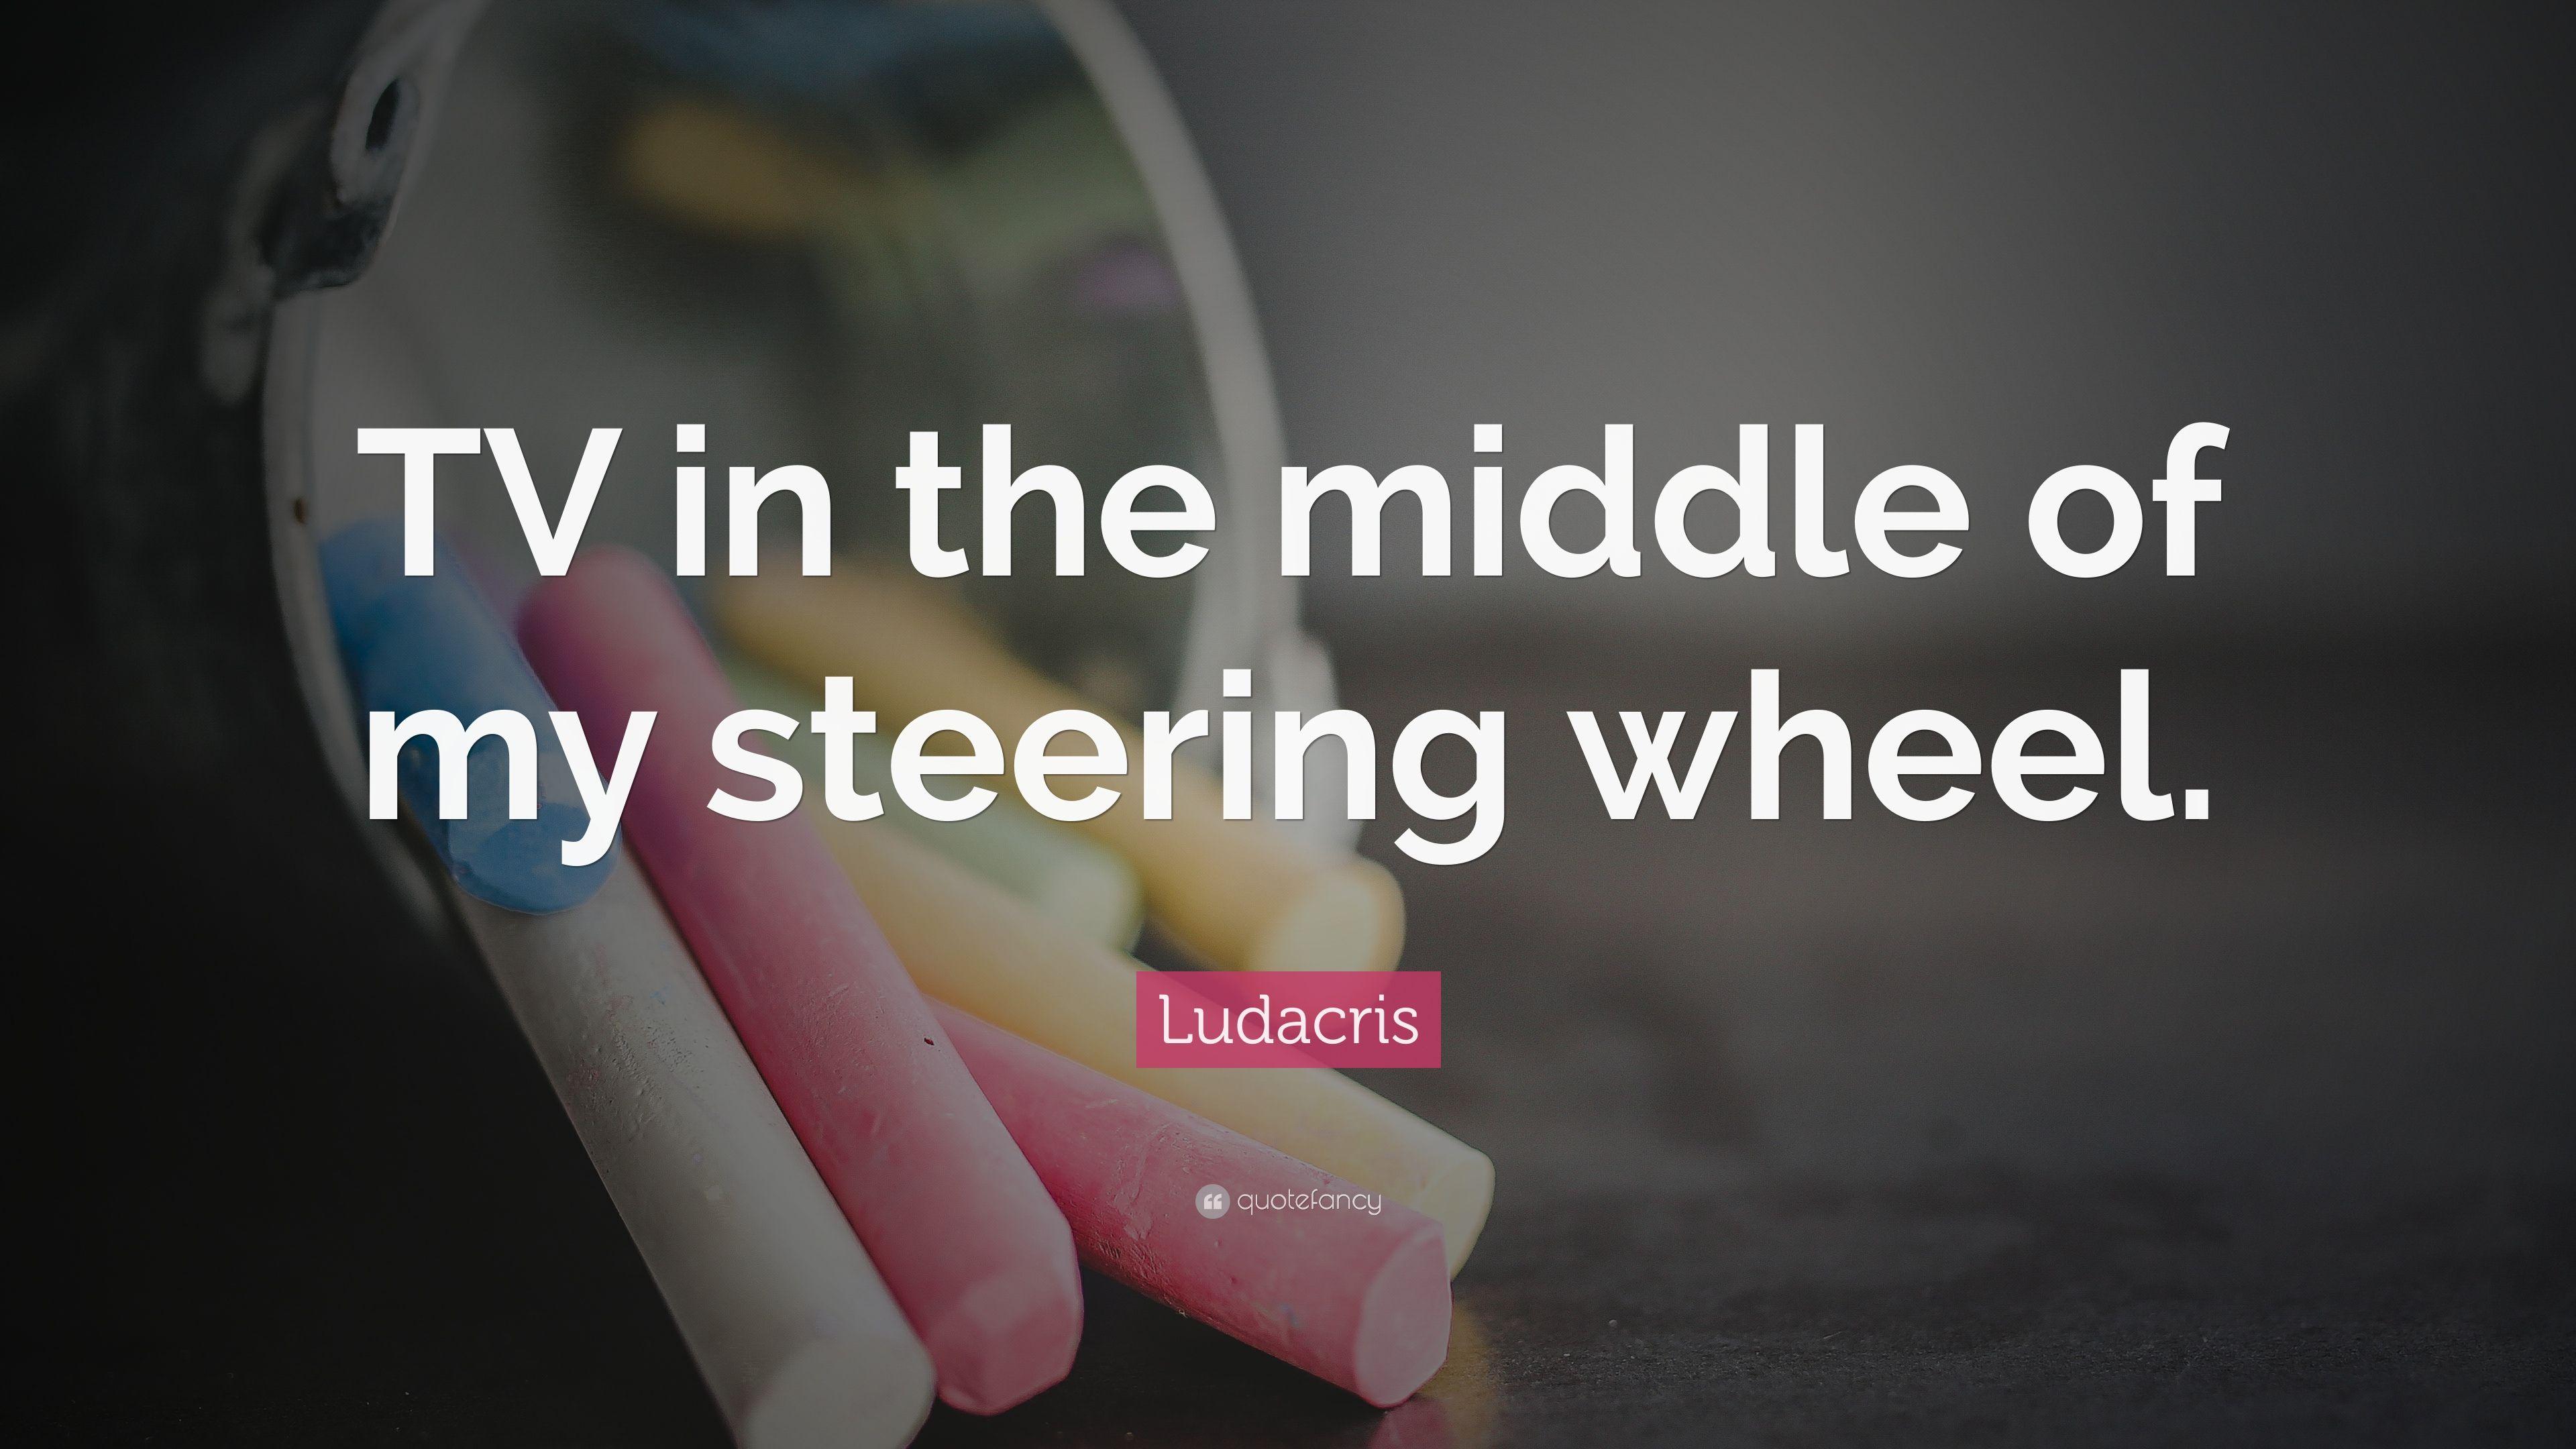 Ludacris Quote: “TV in the middle of my steering wheel.” 5